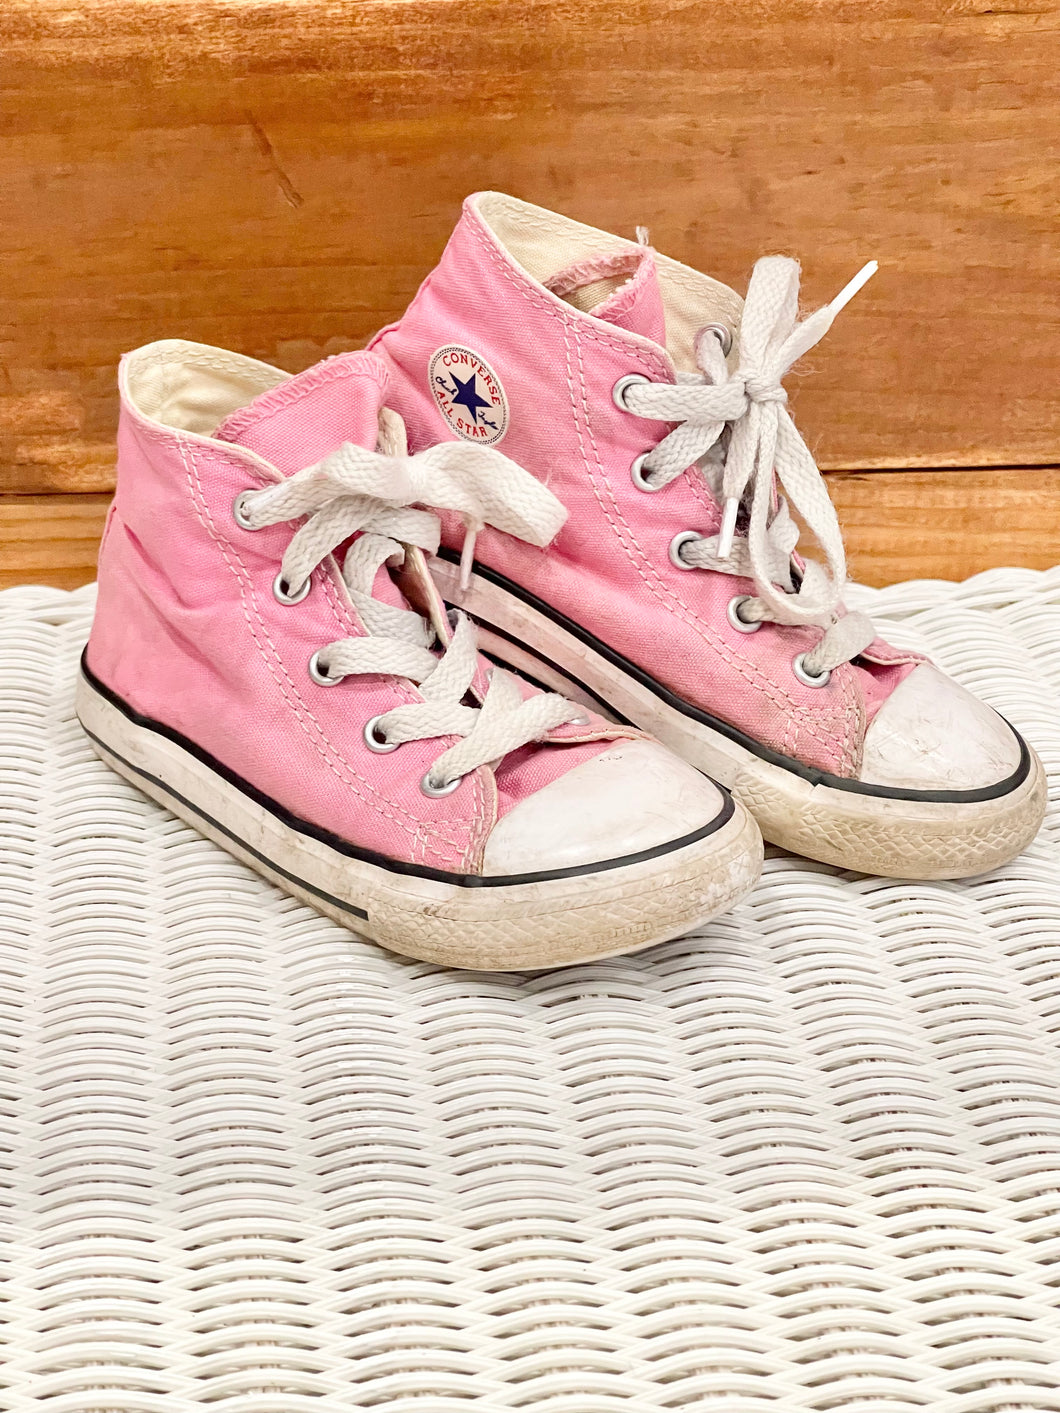 Converse Pink High Top Shoes Size 10